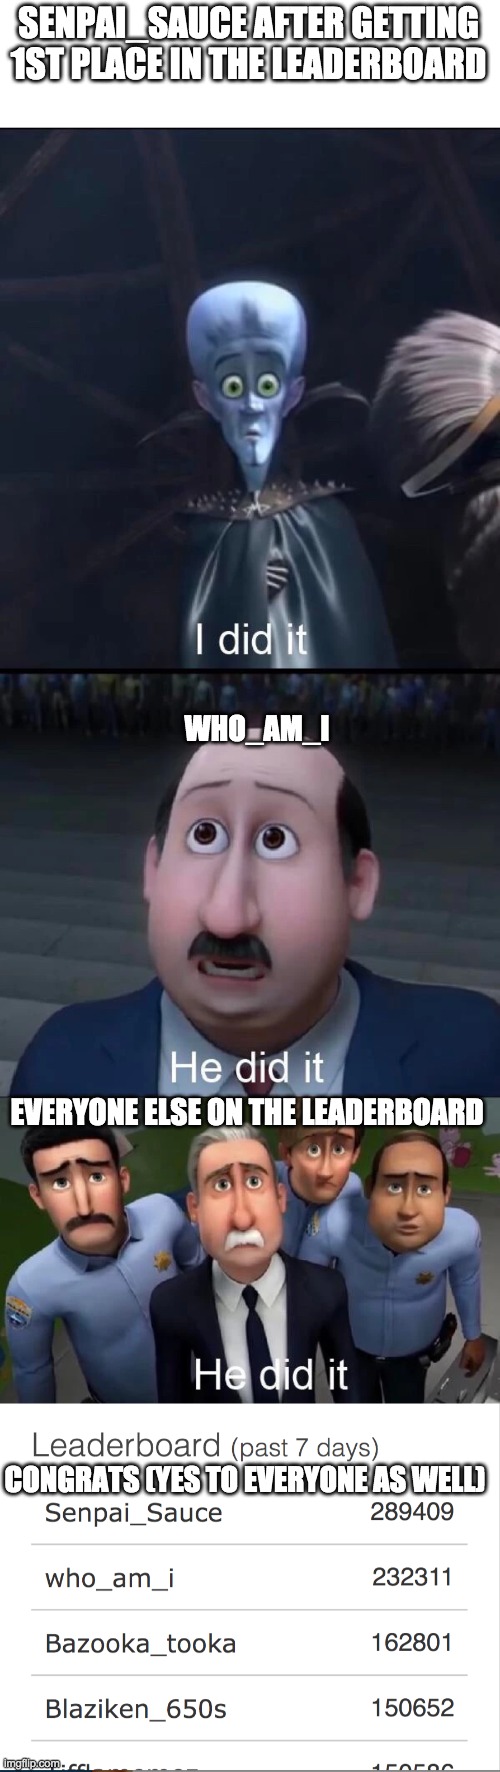 Guys he did it | SENPAI_SAUCE AFTER GETTING 1ST PLACE IN THE LEADERBOARD; WHO_AM_I; EVERYONE ELSE ON THE LEADERBOARD; CONGRATS (YES TO EVERYONE AS WELL) | image tagged in megamind i did it,memes,funny,congratulations,made by bob_fnf | made w/ Imgflip meme maker